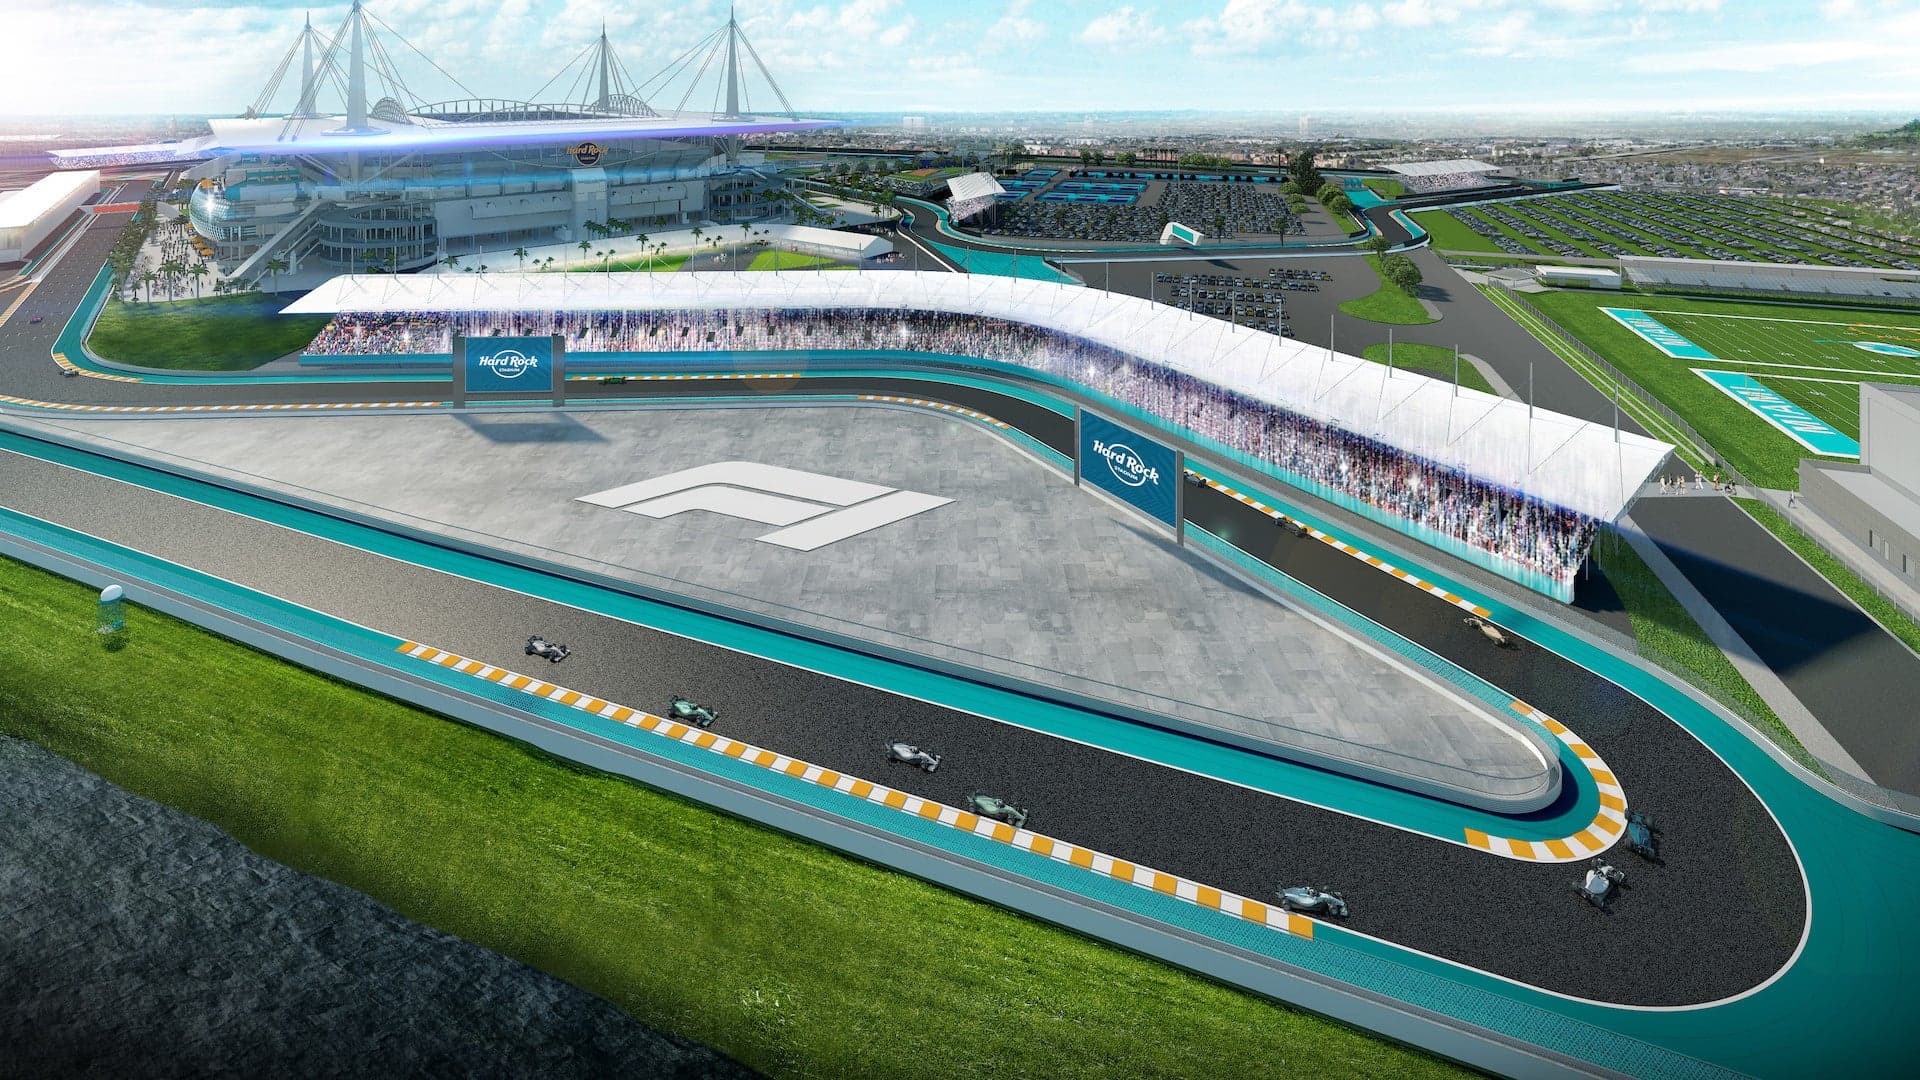 2021 Miami F1 Grand Prix a Step Closer With Signed Prelim Deal at NFL Dolphins Stadium